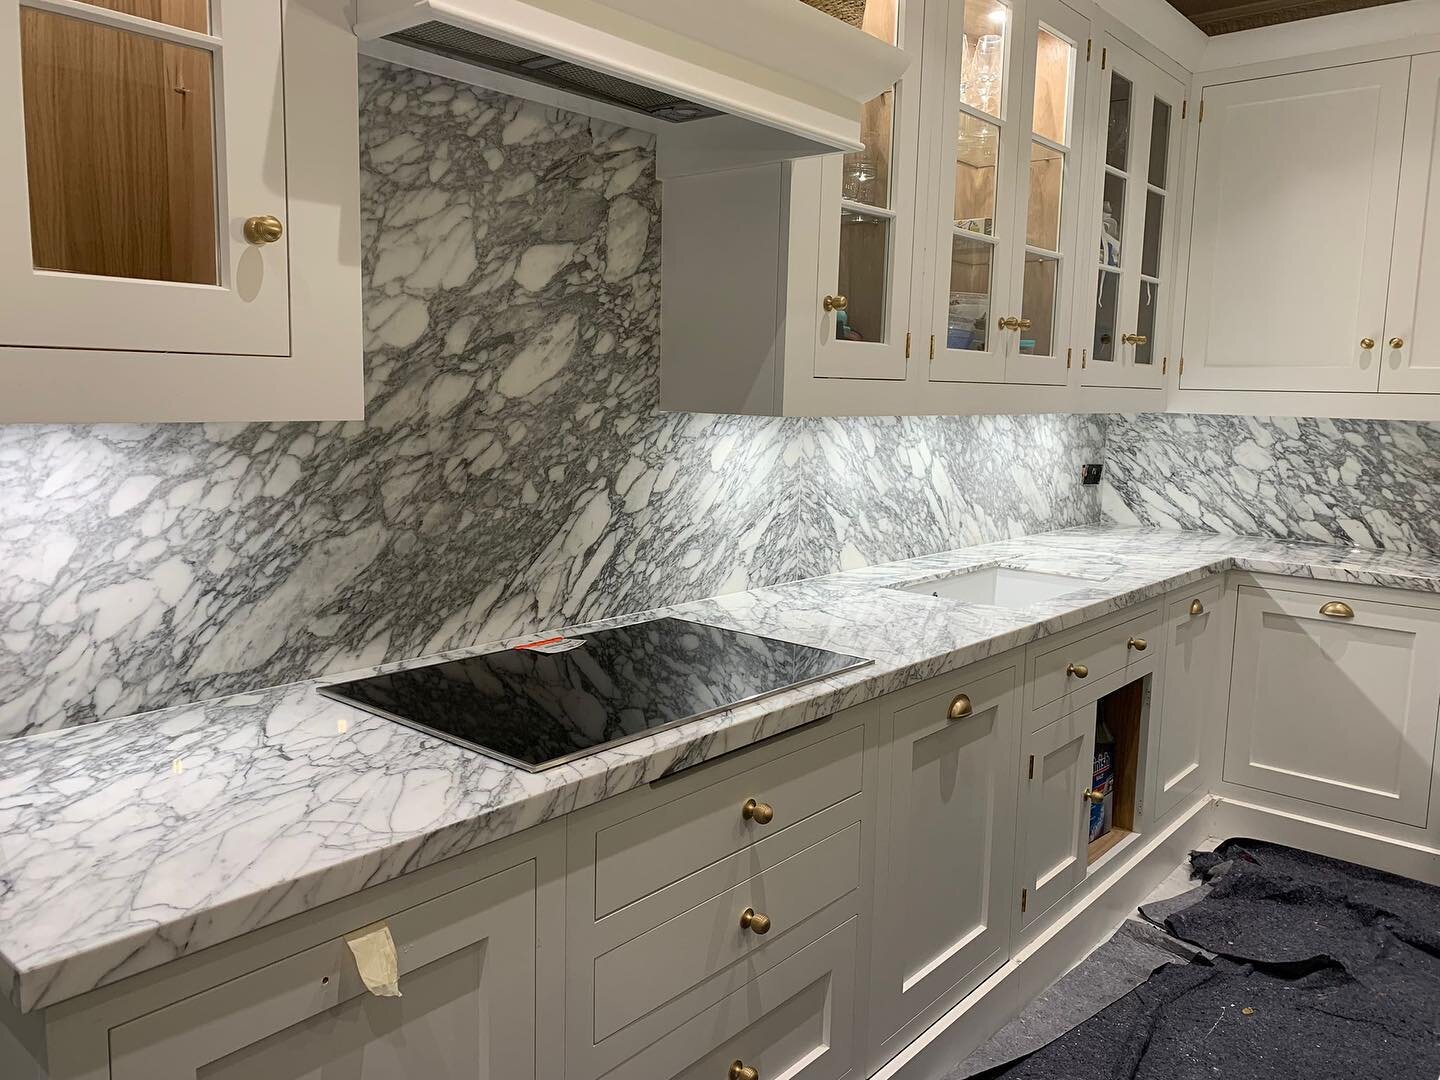 Marble worktop fitted to our Marylebone project #bigbeanconstruction #marble #design #kitchen #beautiful #luxury #architecture #building #london